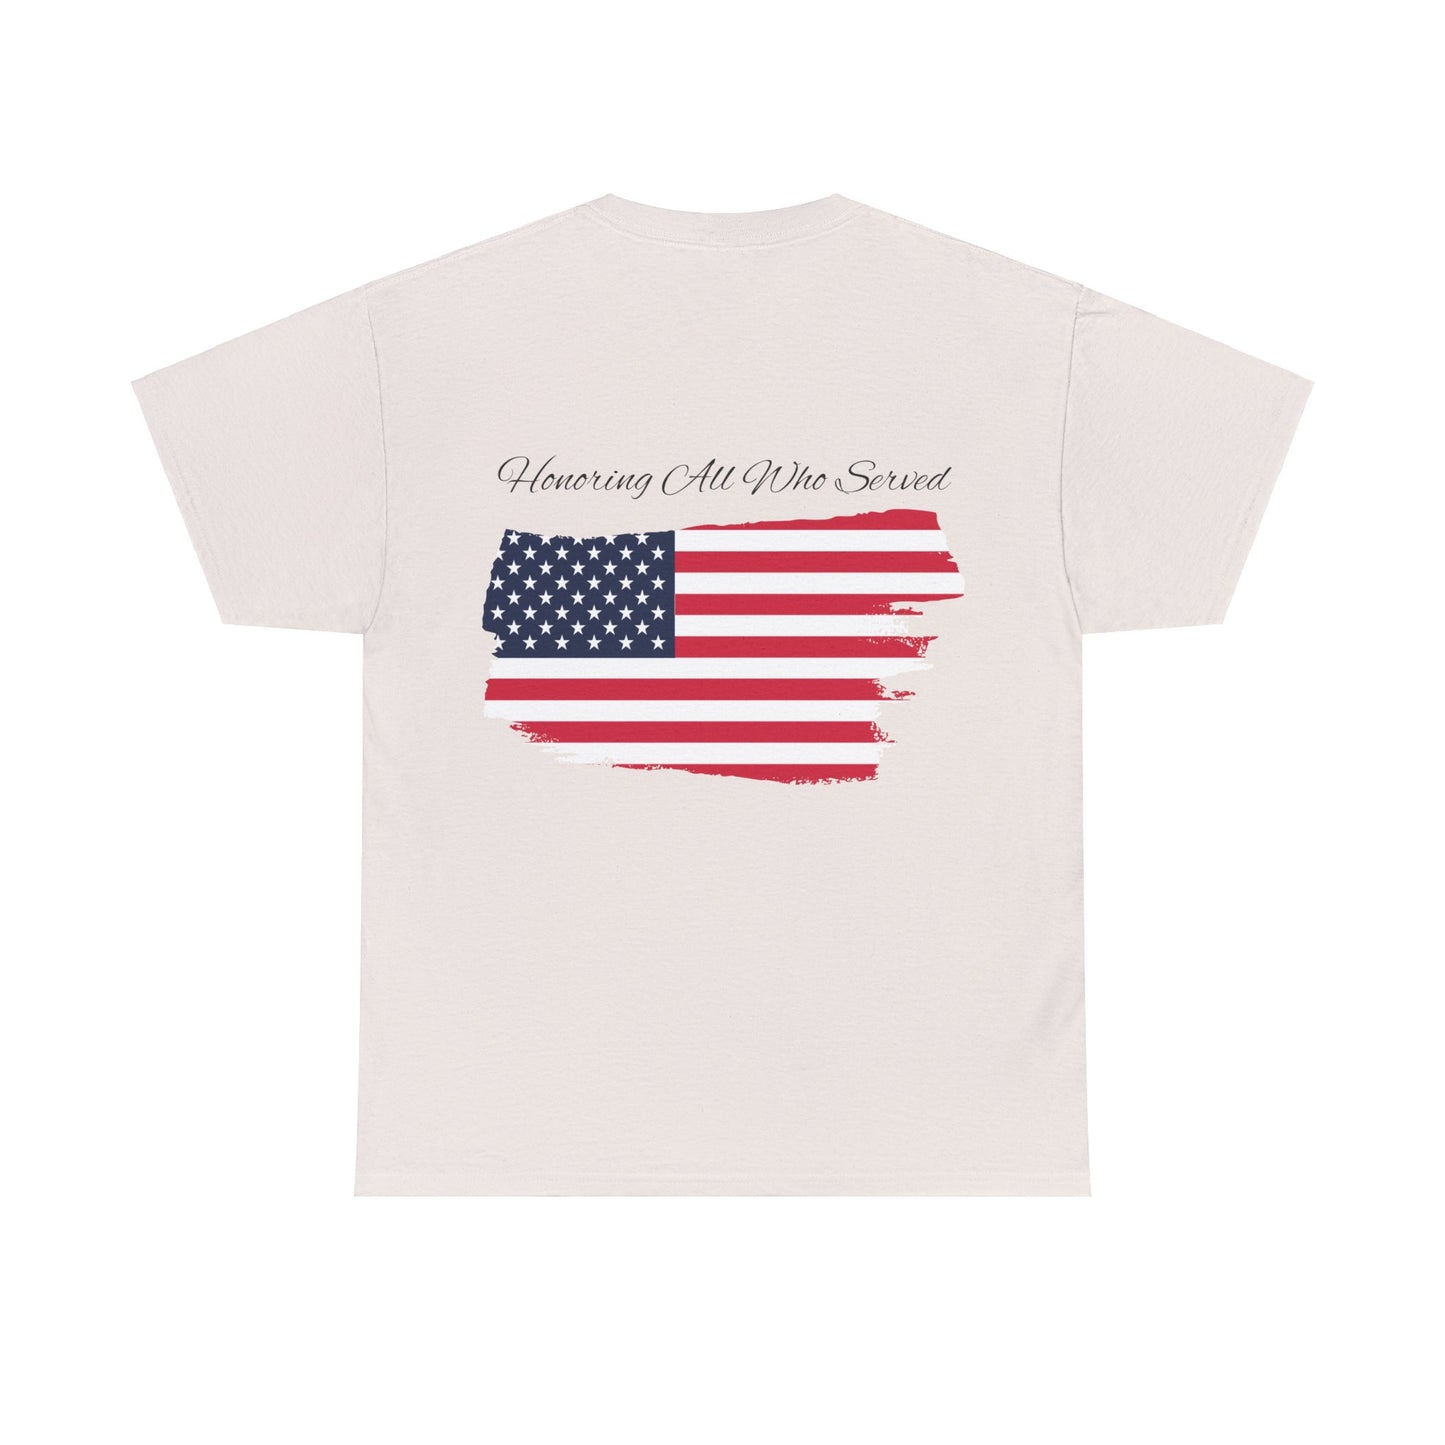 Unisex cotton tee with 'Honoring All Who Served' print for veterans tribute5